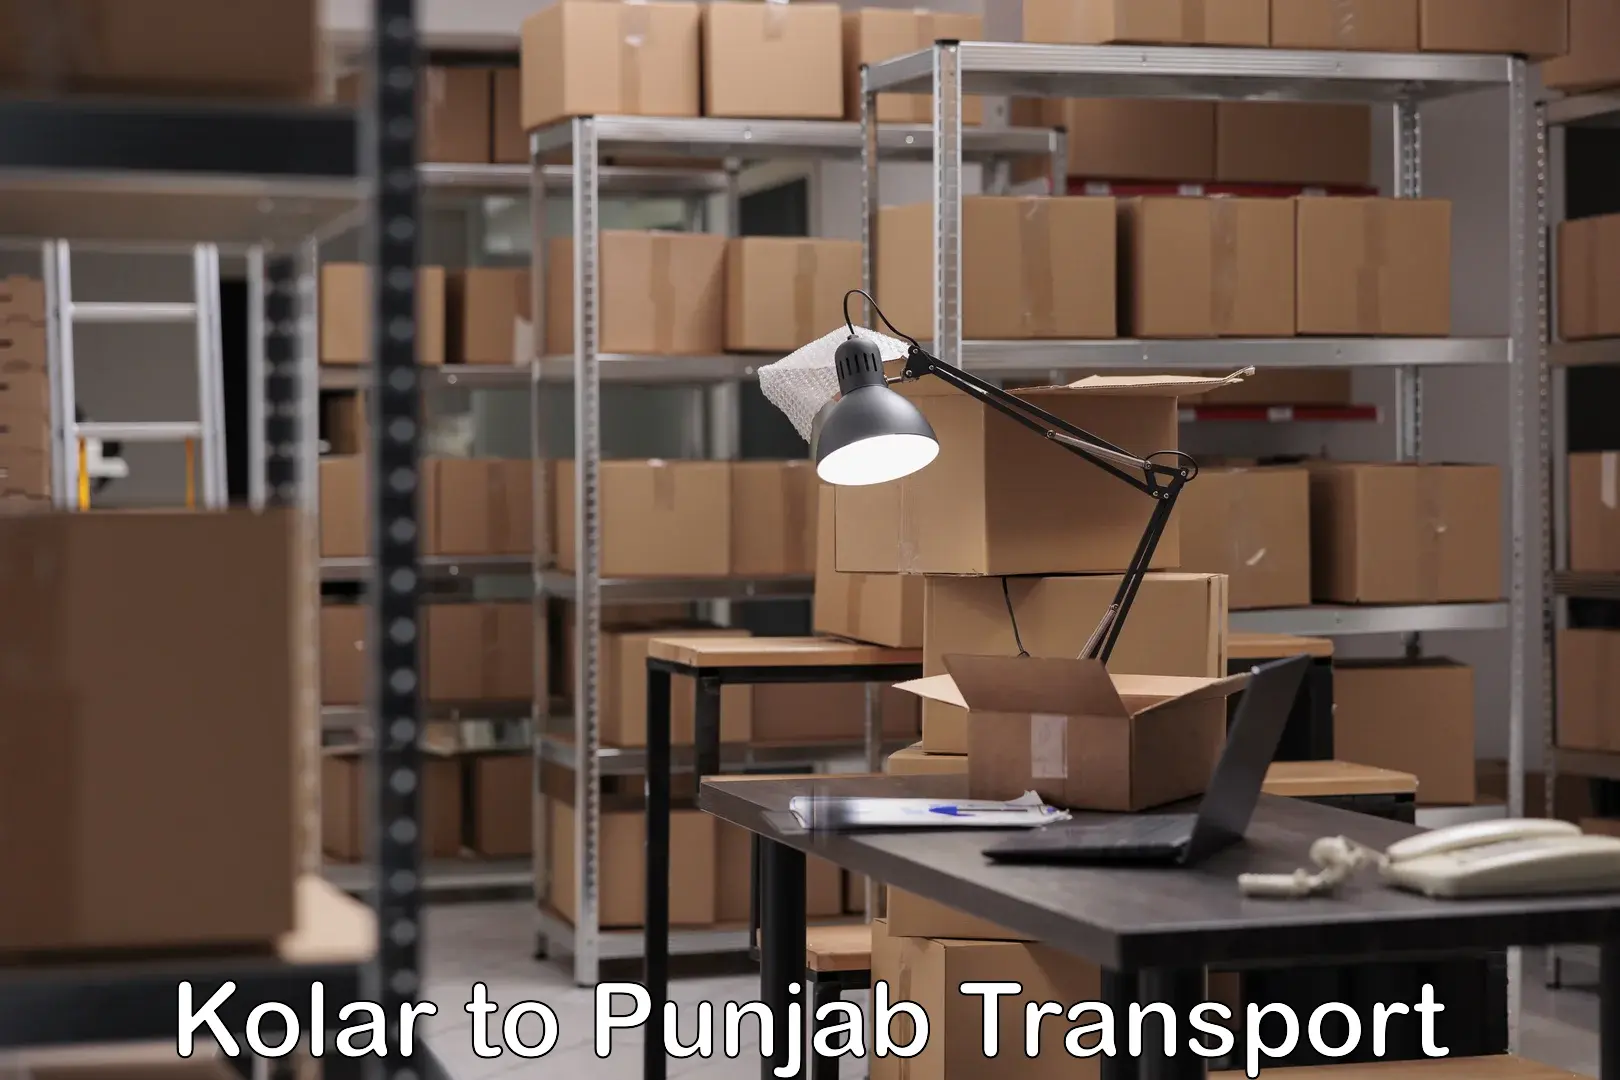 Transport bike from one state to another Kolar to Punjab